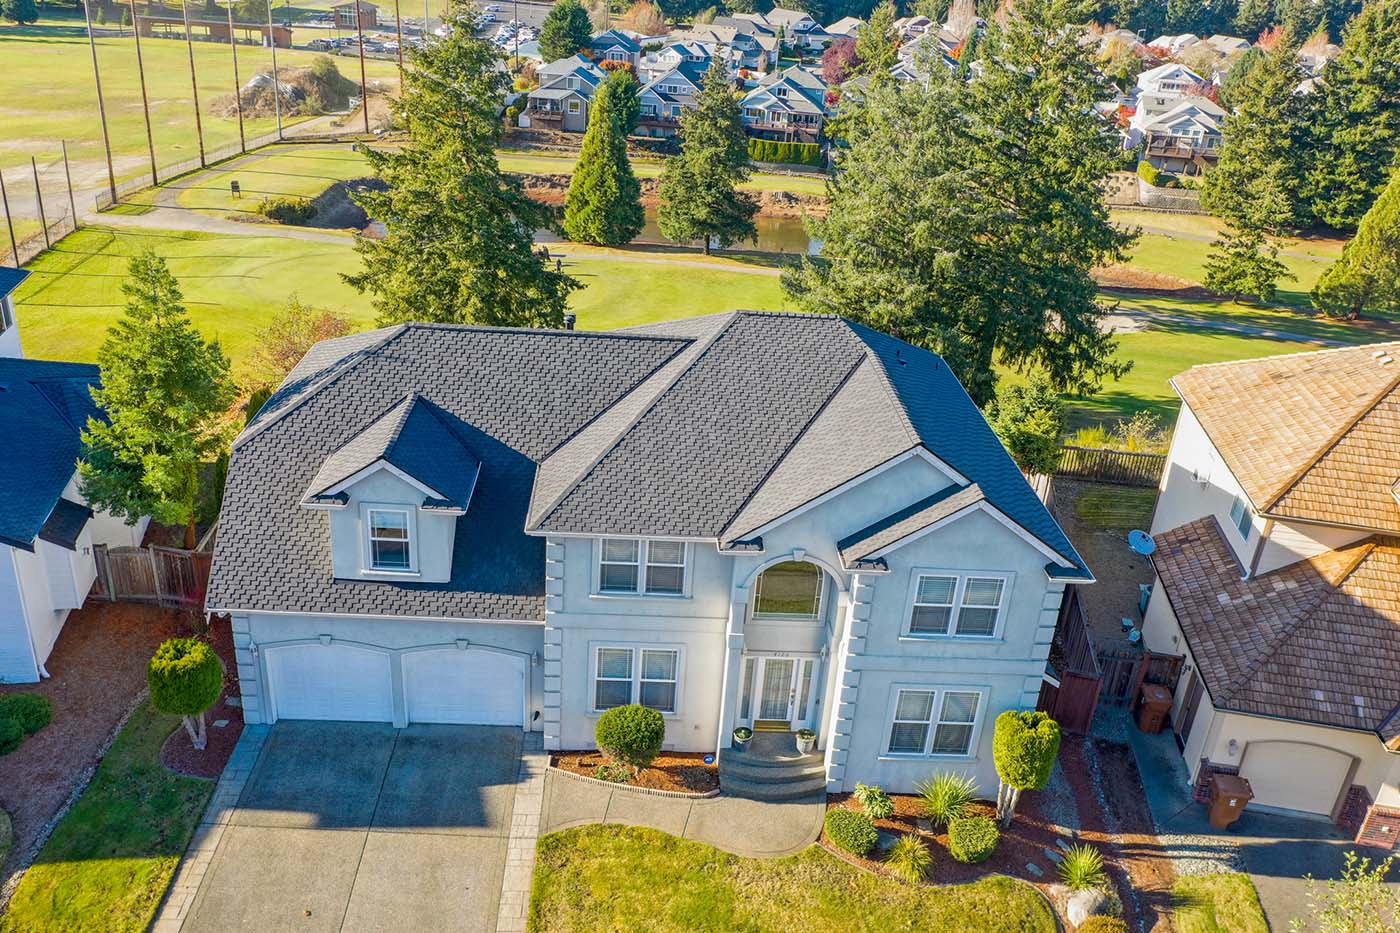 New Composite Asphalt Shingle Roof with Stucco in Tacoma, Washington - view of front of house